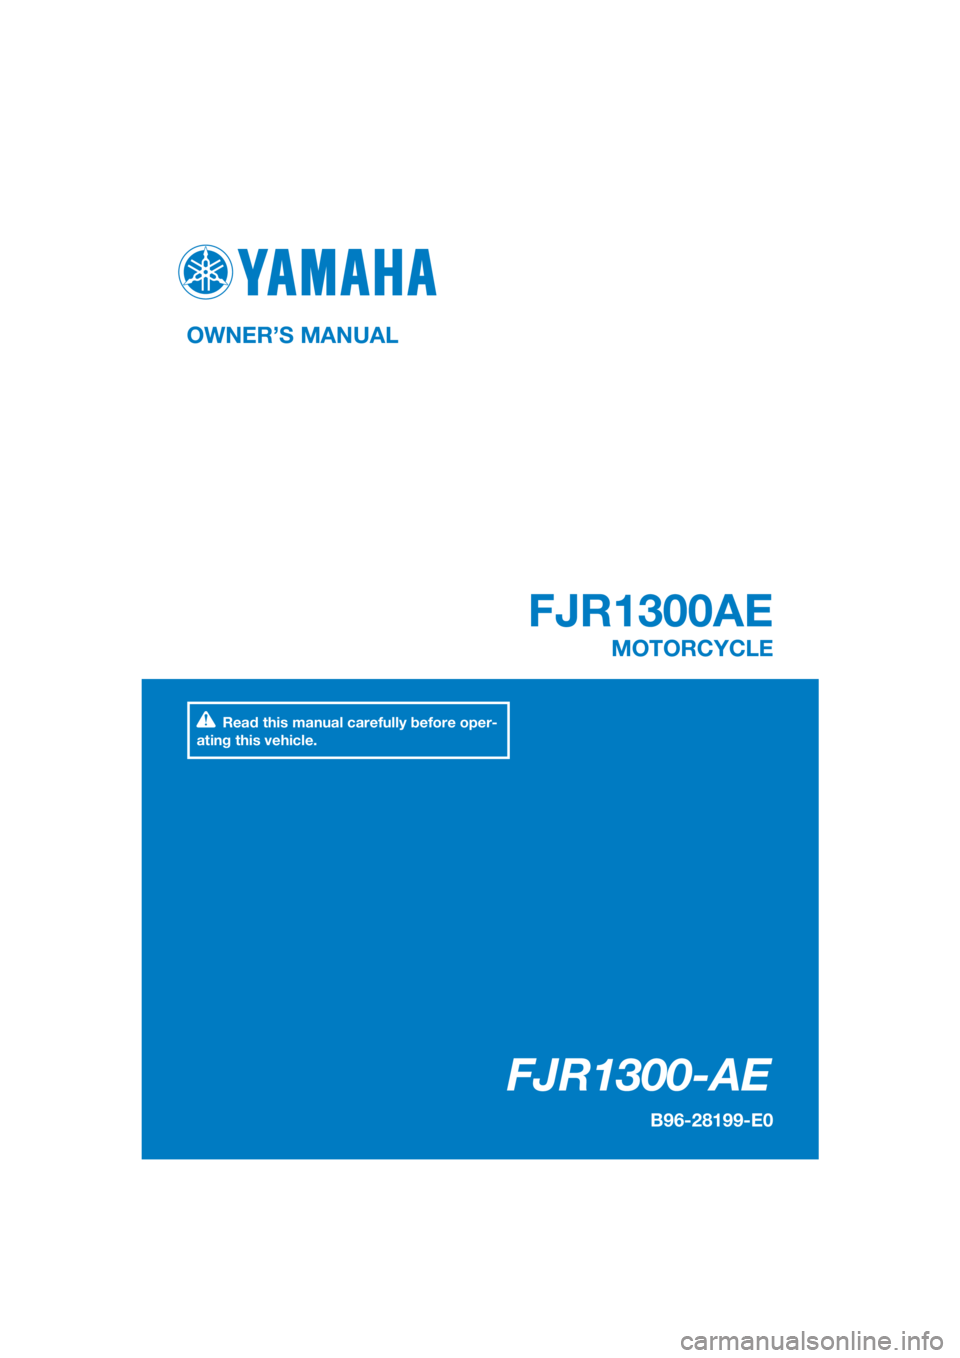 YAMAHA FJR1300AE 2016  Owners Manual DIC183
FJR1300-AE
FJR1300AE
OWNER’S MANUAL
B96-28199-E0
MOTORCYCLE
[English  (E)]
Read this manual carefully before oper-
ating this vehicle. 